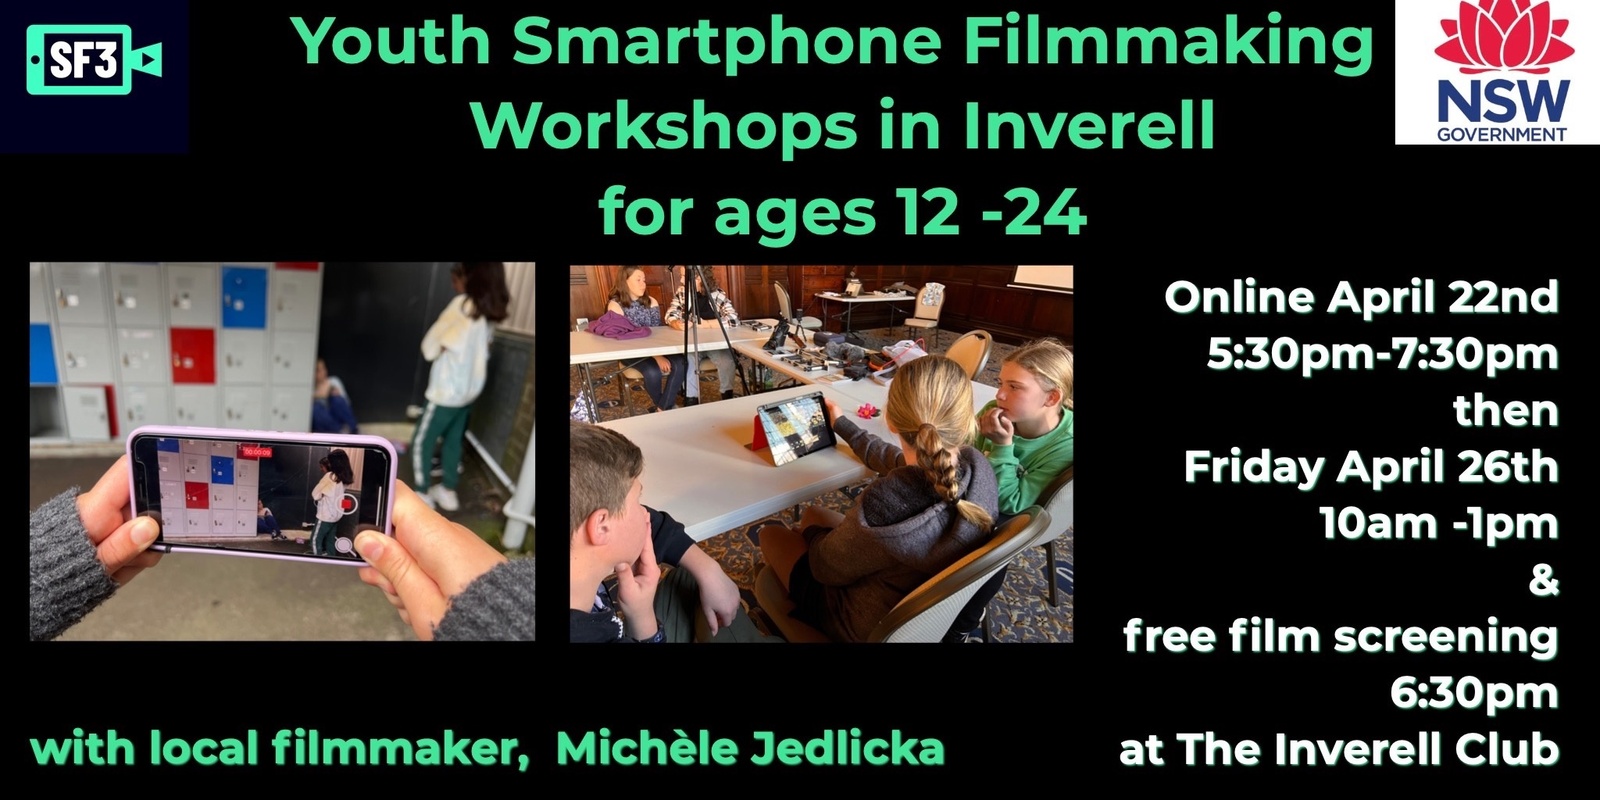 Banner image for Smartphone Filmmaking Workshop & Screening in Inverell for 12-24 year olds